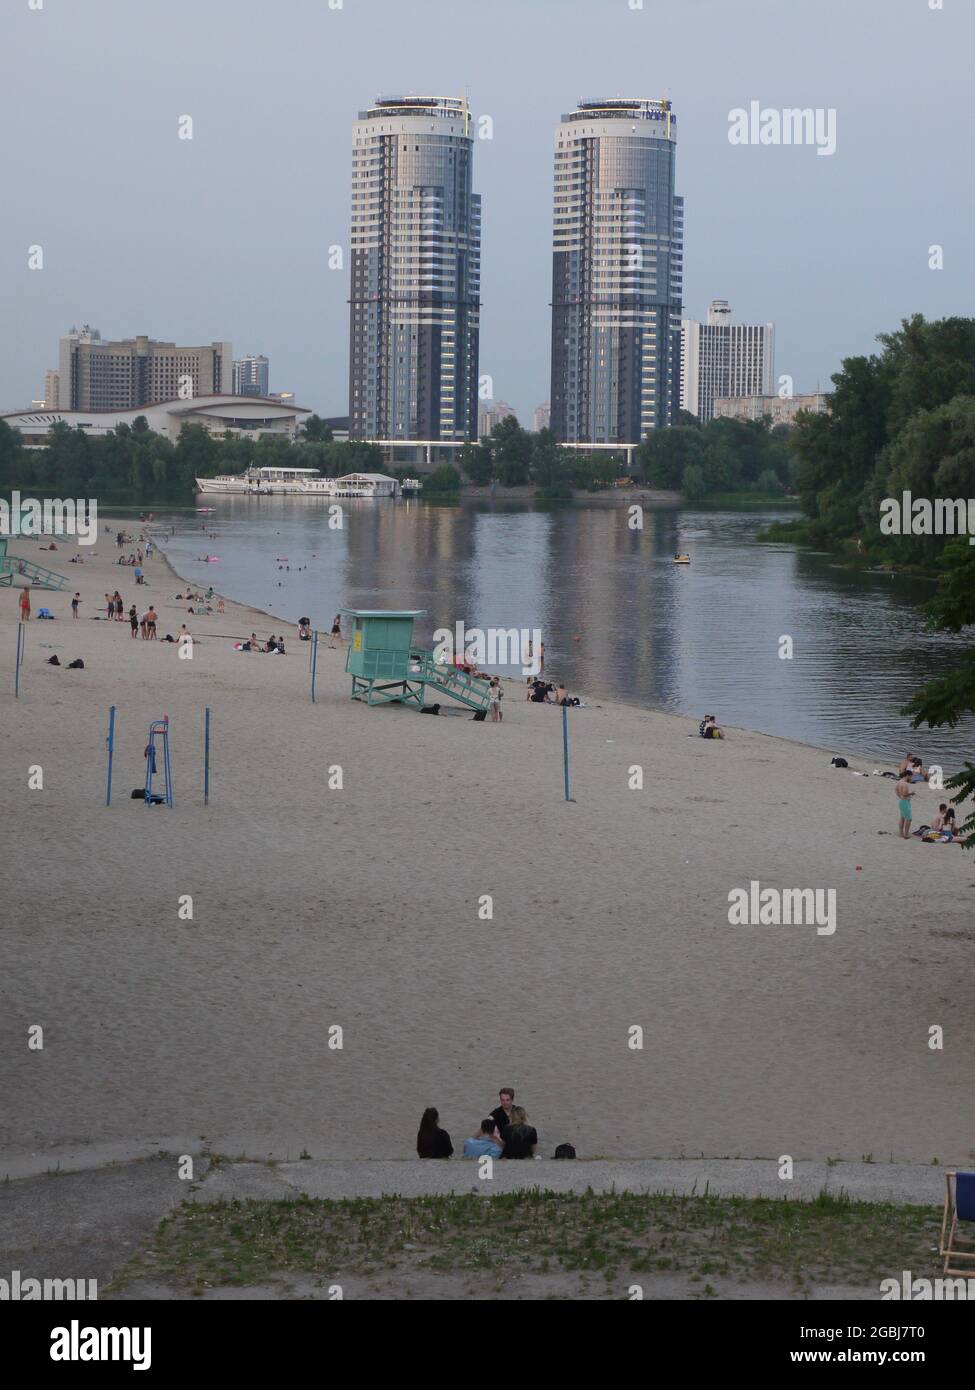 The twin towers and beaches on the banks of the Dnieper river in central Kiev, Ukraine, on a a summer evening Stock Photo